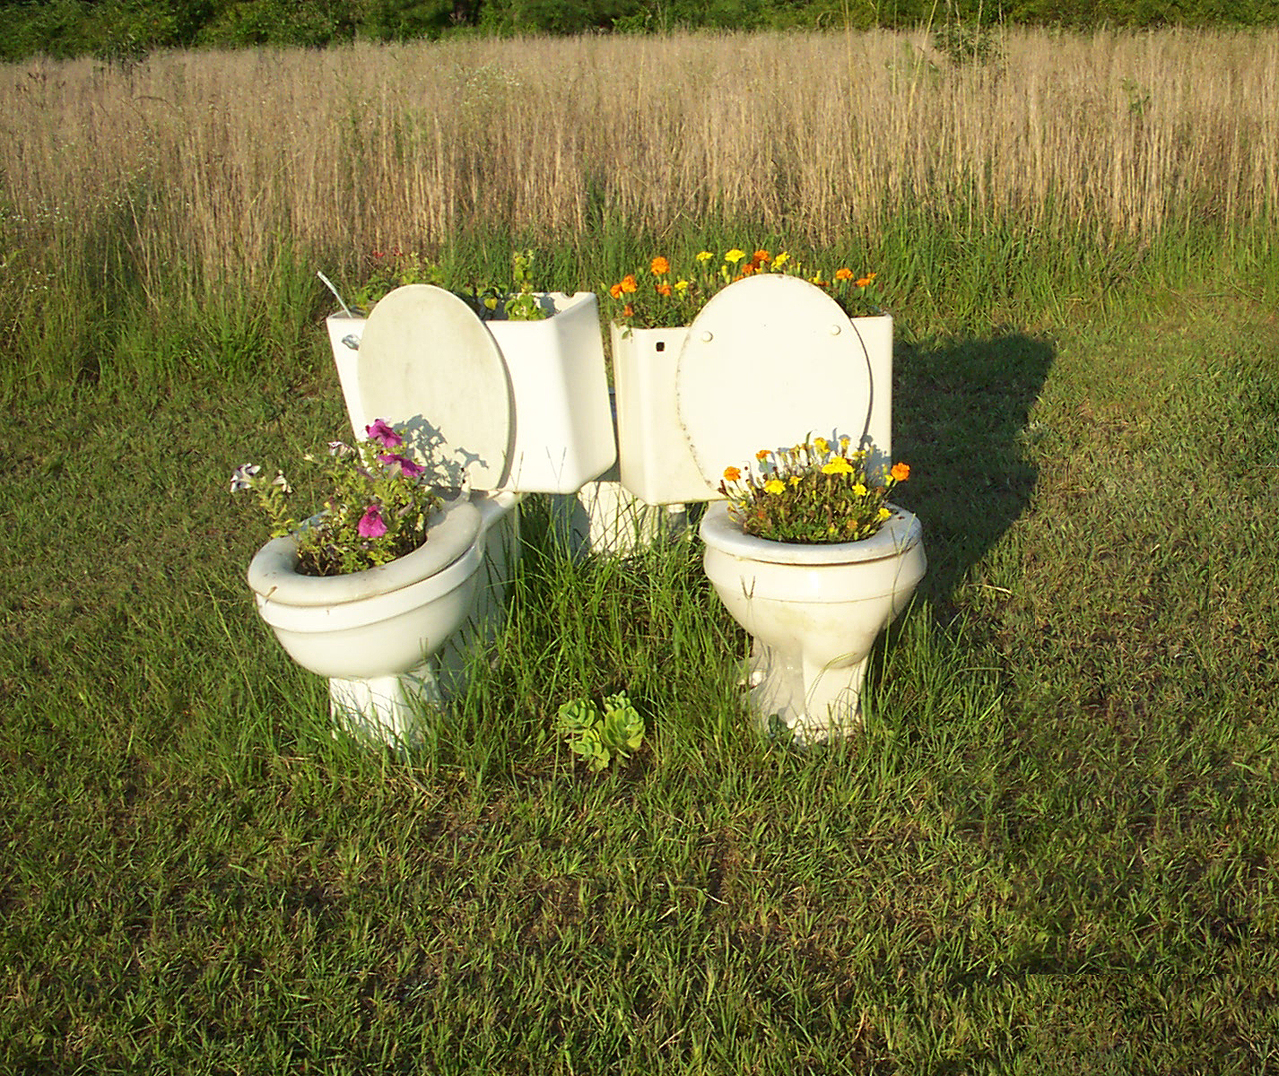 Grass growing out of twin toilets